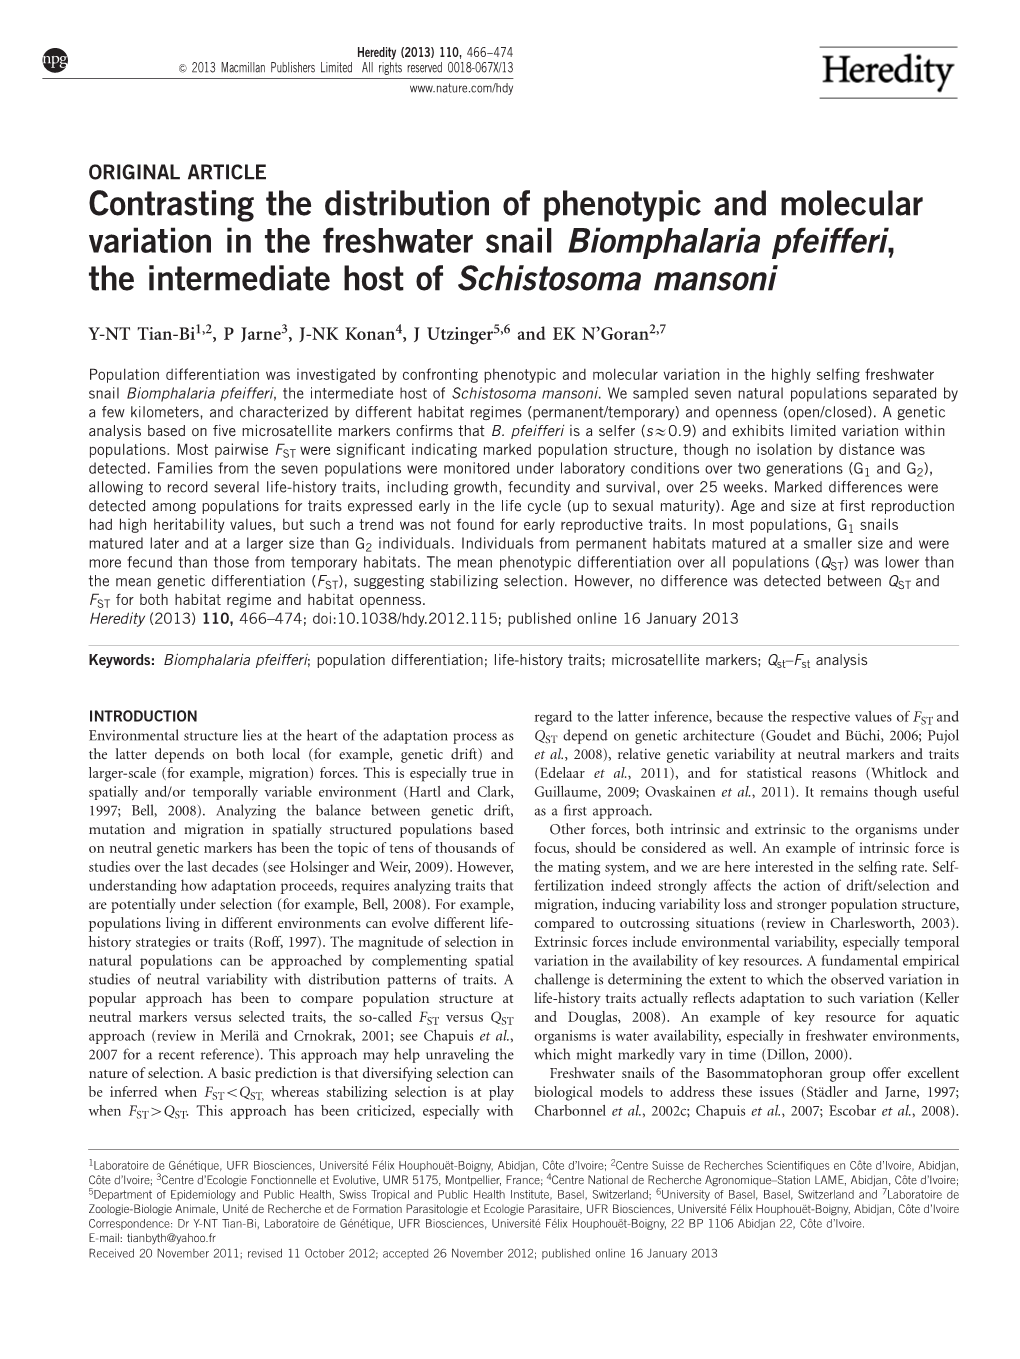 Contrasting the Distribution of Phenotypic and Molecular Variation in the Freshwater Snail Biomphalaria Pfeifferi, the Intermediate Host of Schistosoma Mansoni